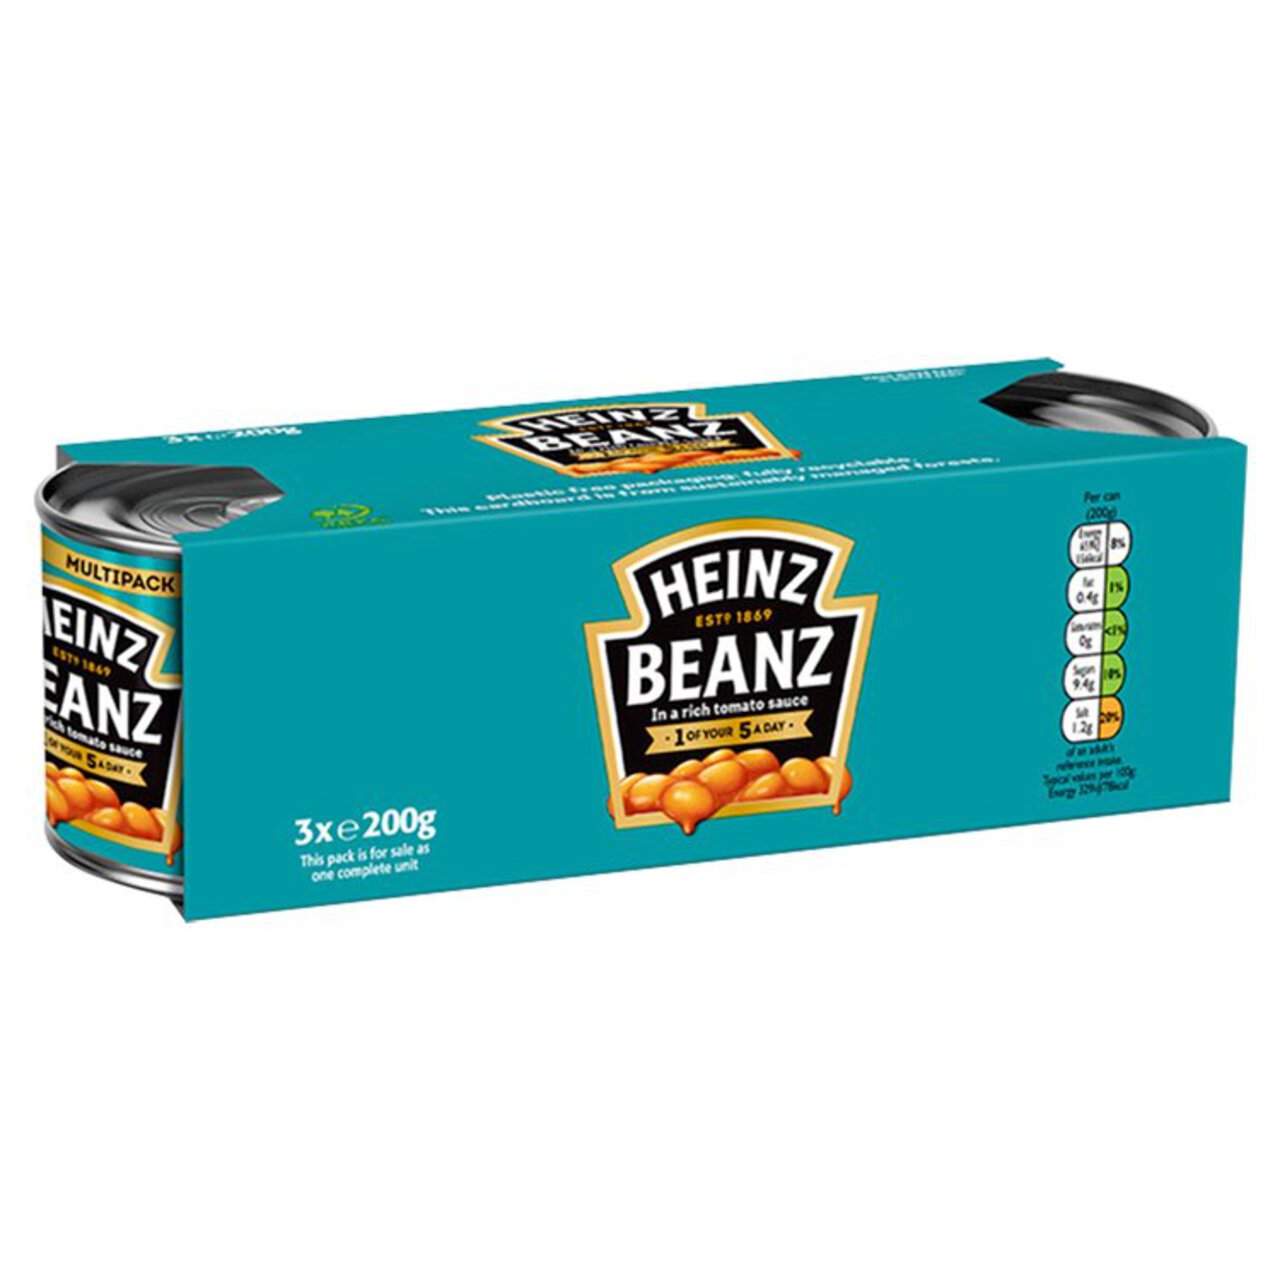 Heinz Baked Beanz in Tomato Sauce Triple Pack 3 x 200g